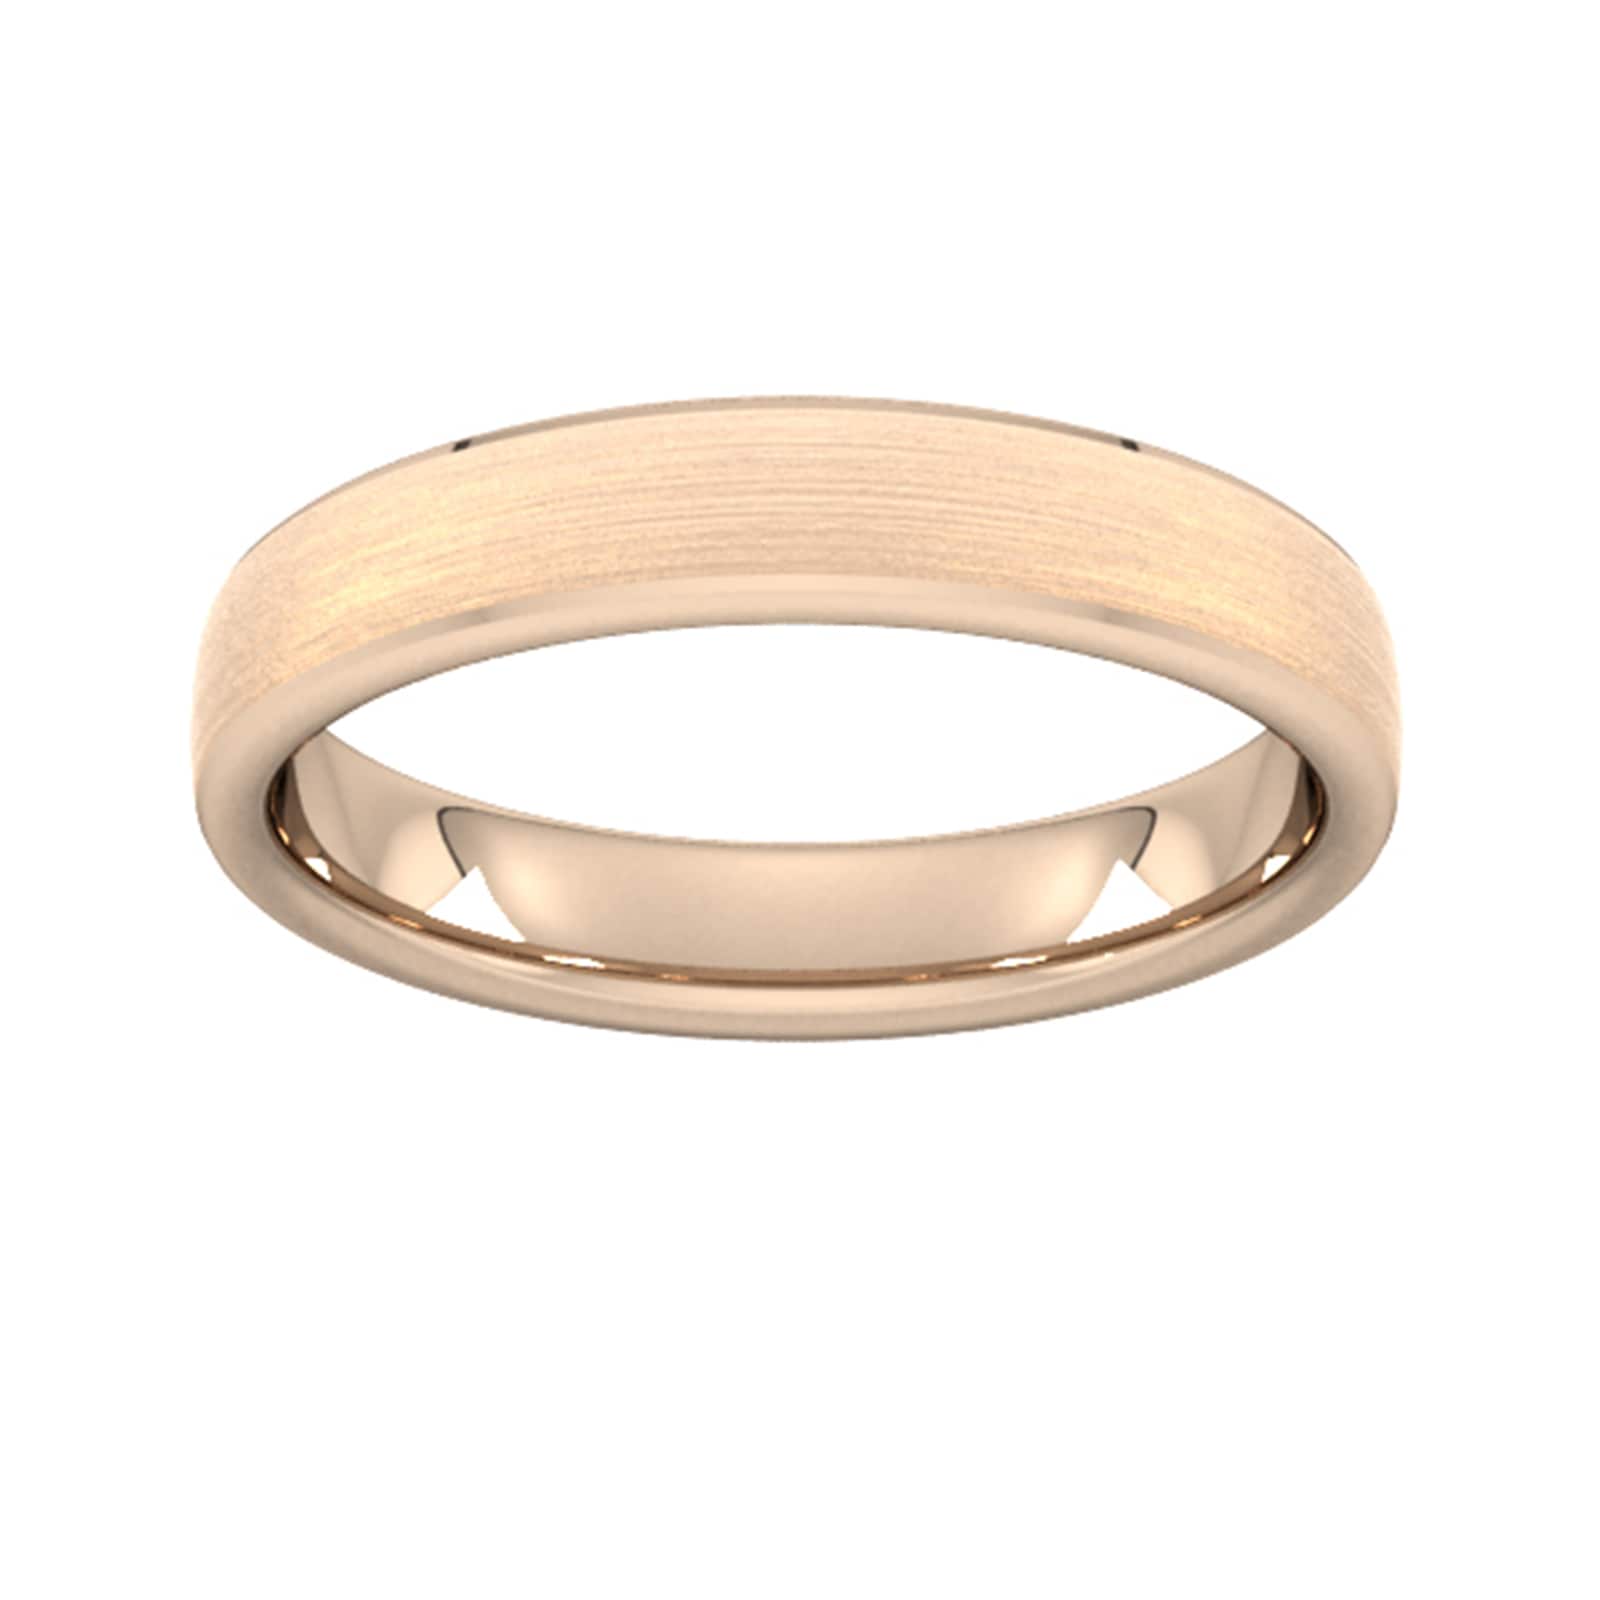 4mm Flat Court Heavy Polished Chamfered Edges With Matt Centre Wedding Ring In 18 Carat Rose Gold - Ring Size W